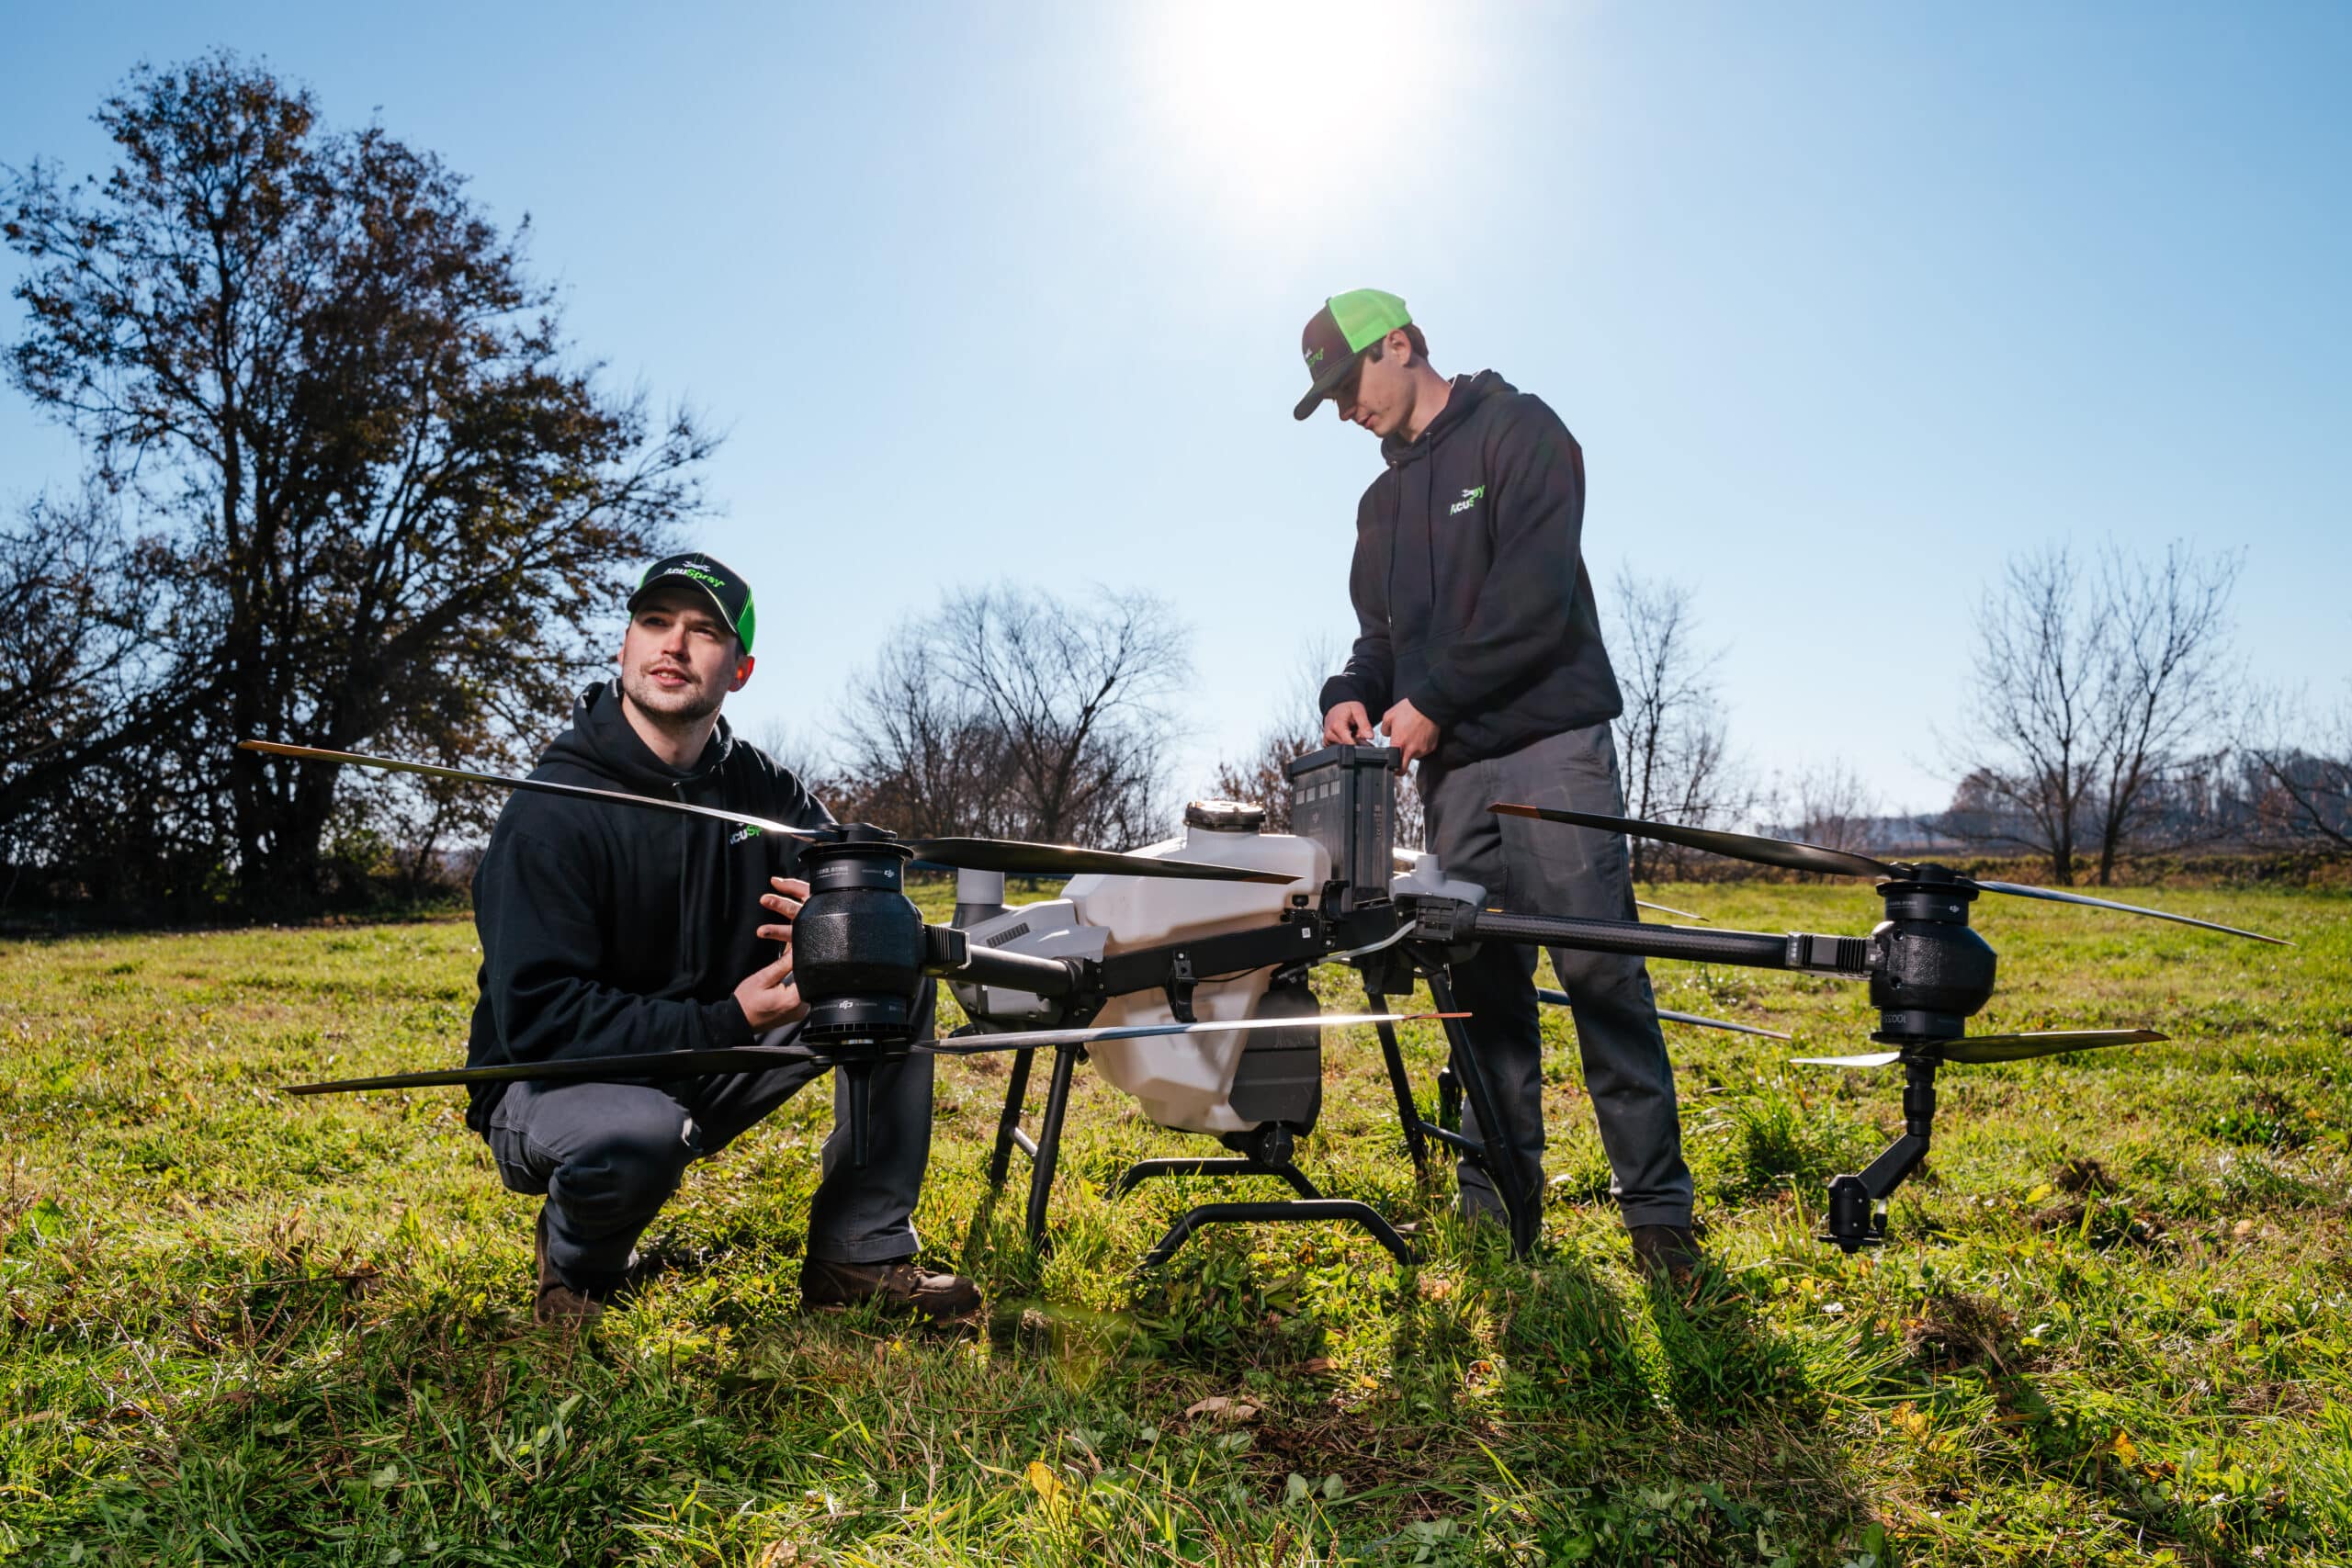 Two technicians prepare an advanced drone for agricultural use in a field at sunrise, highlighting modern farming technology and collaboration.